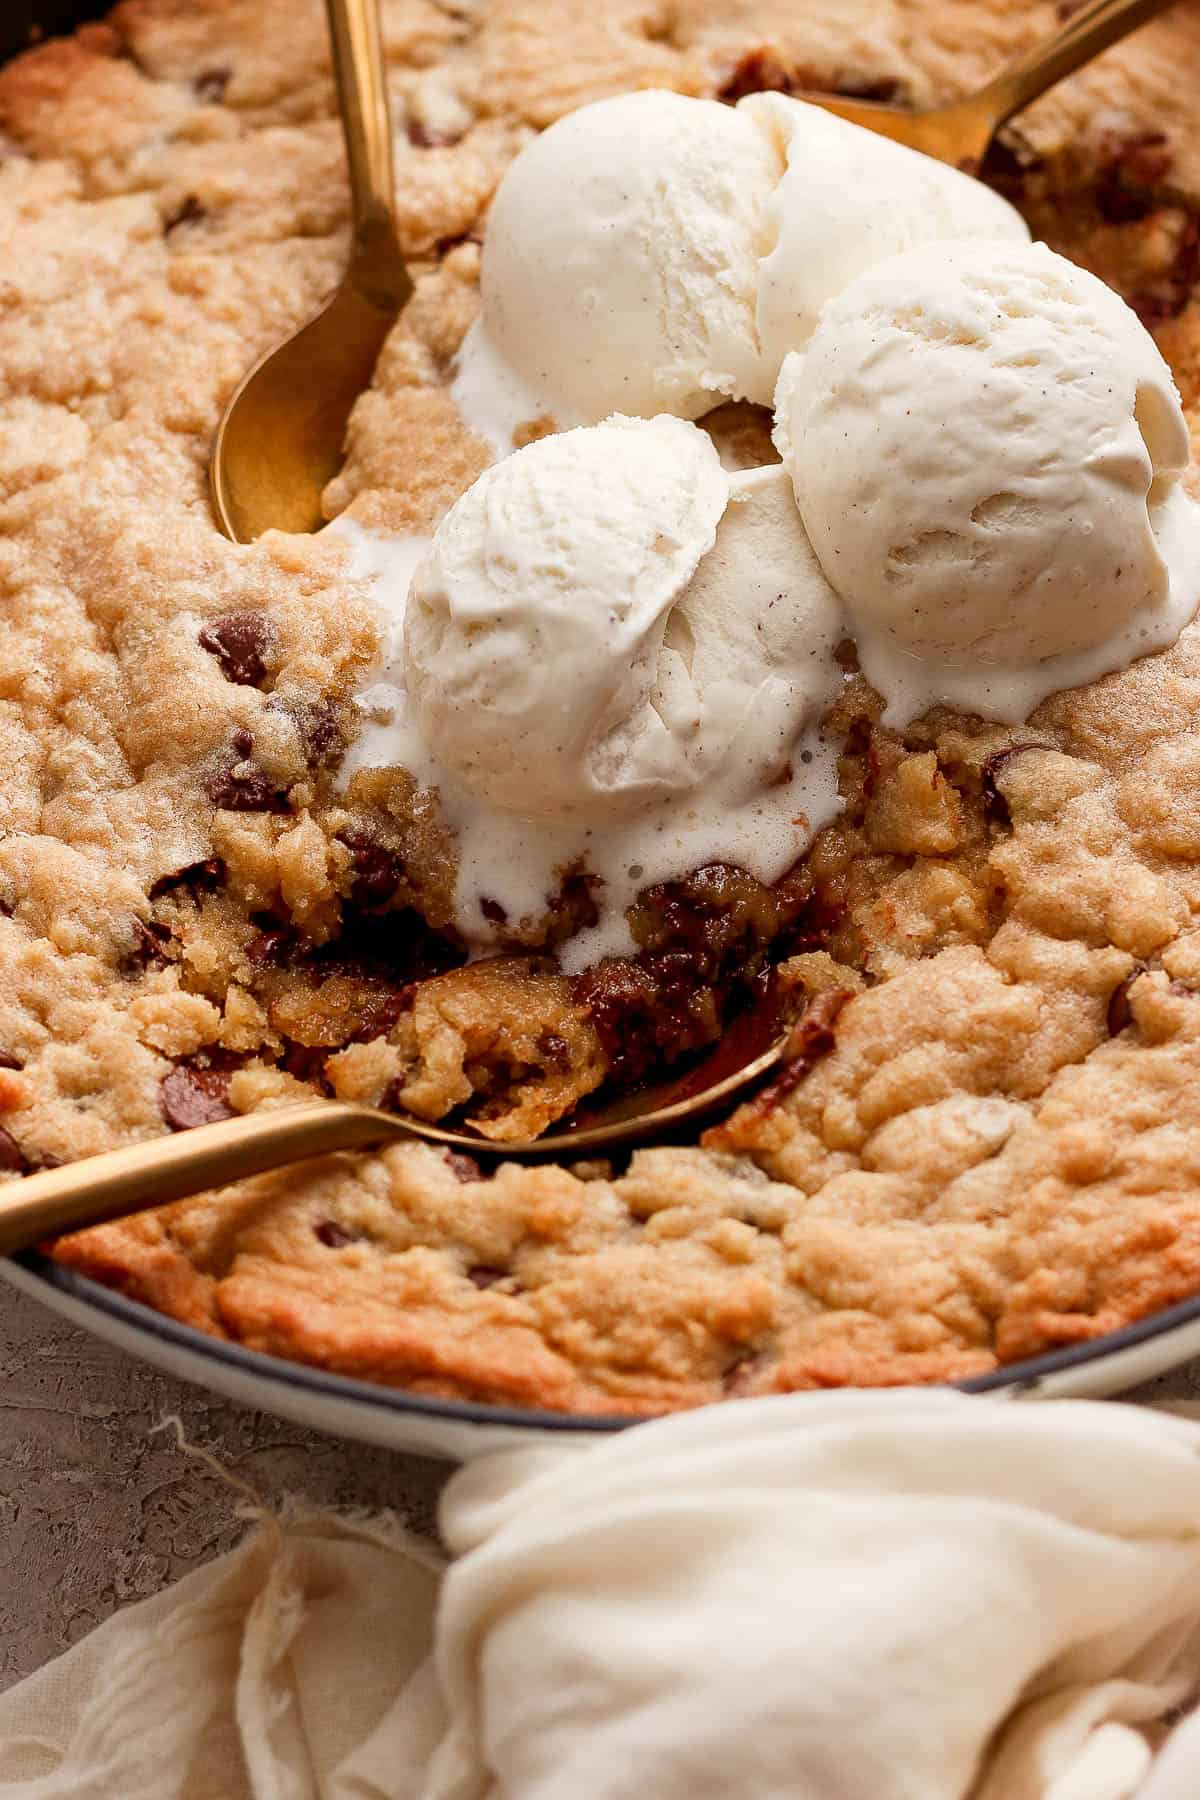 Close-up shot of the melty ice cream on top of the warm skillet cookie.